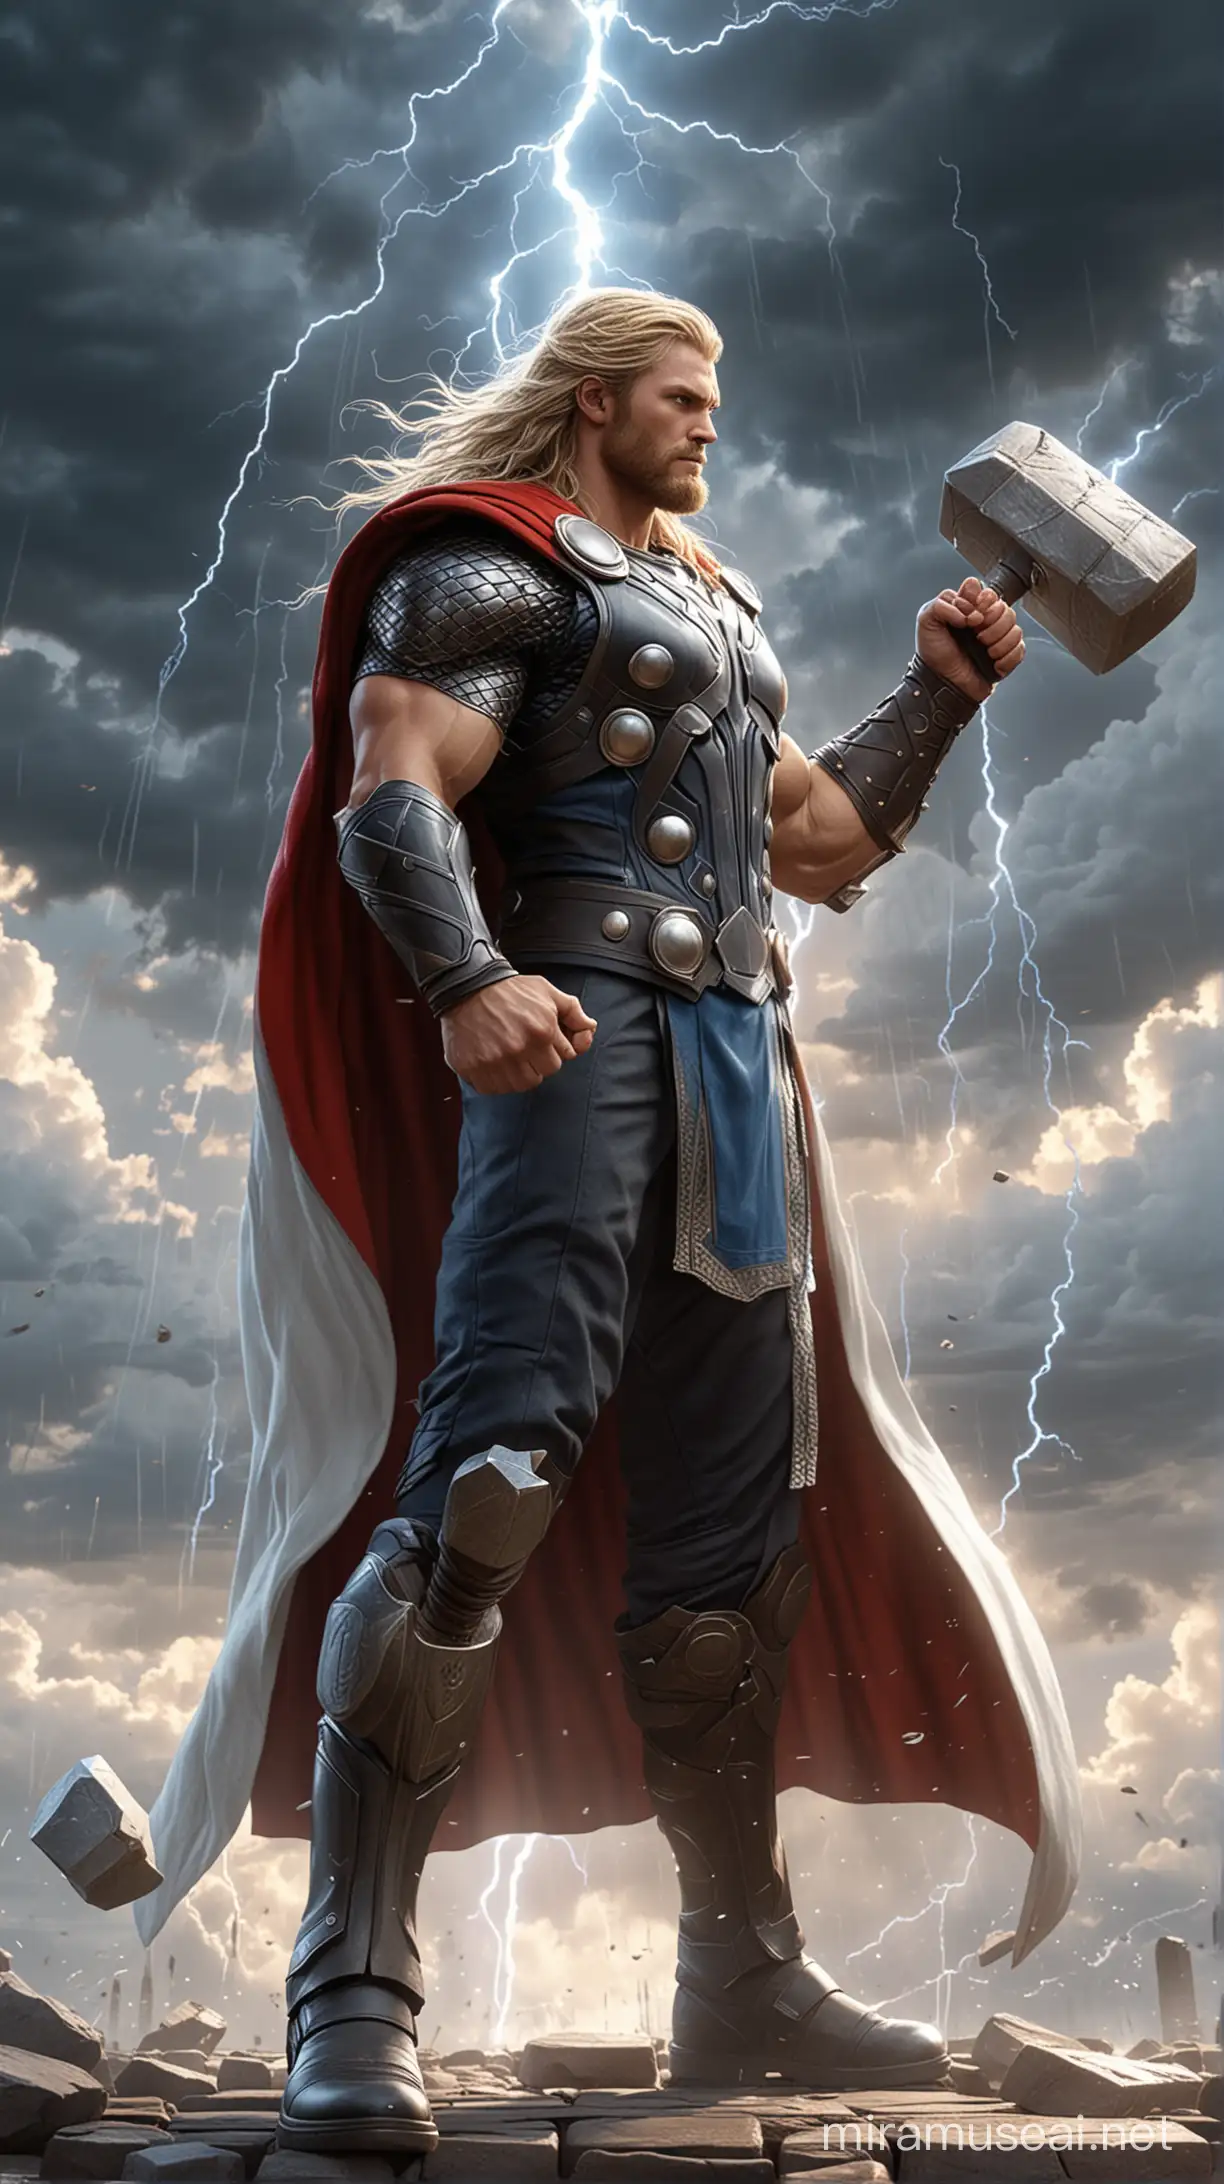 Mighty Thor Animation Style Character with Hammer amidst Lightning and Dynamic Clouds